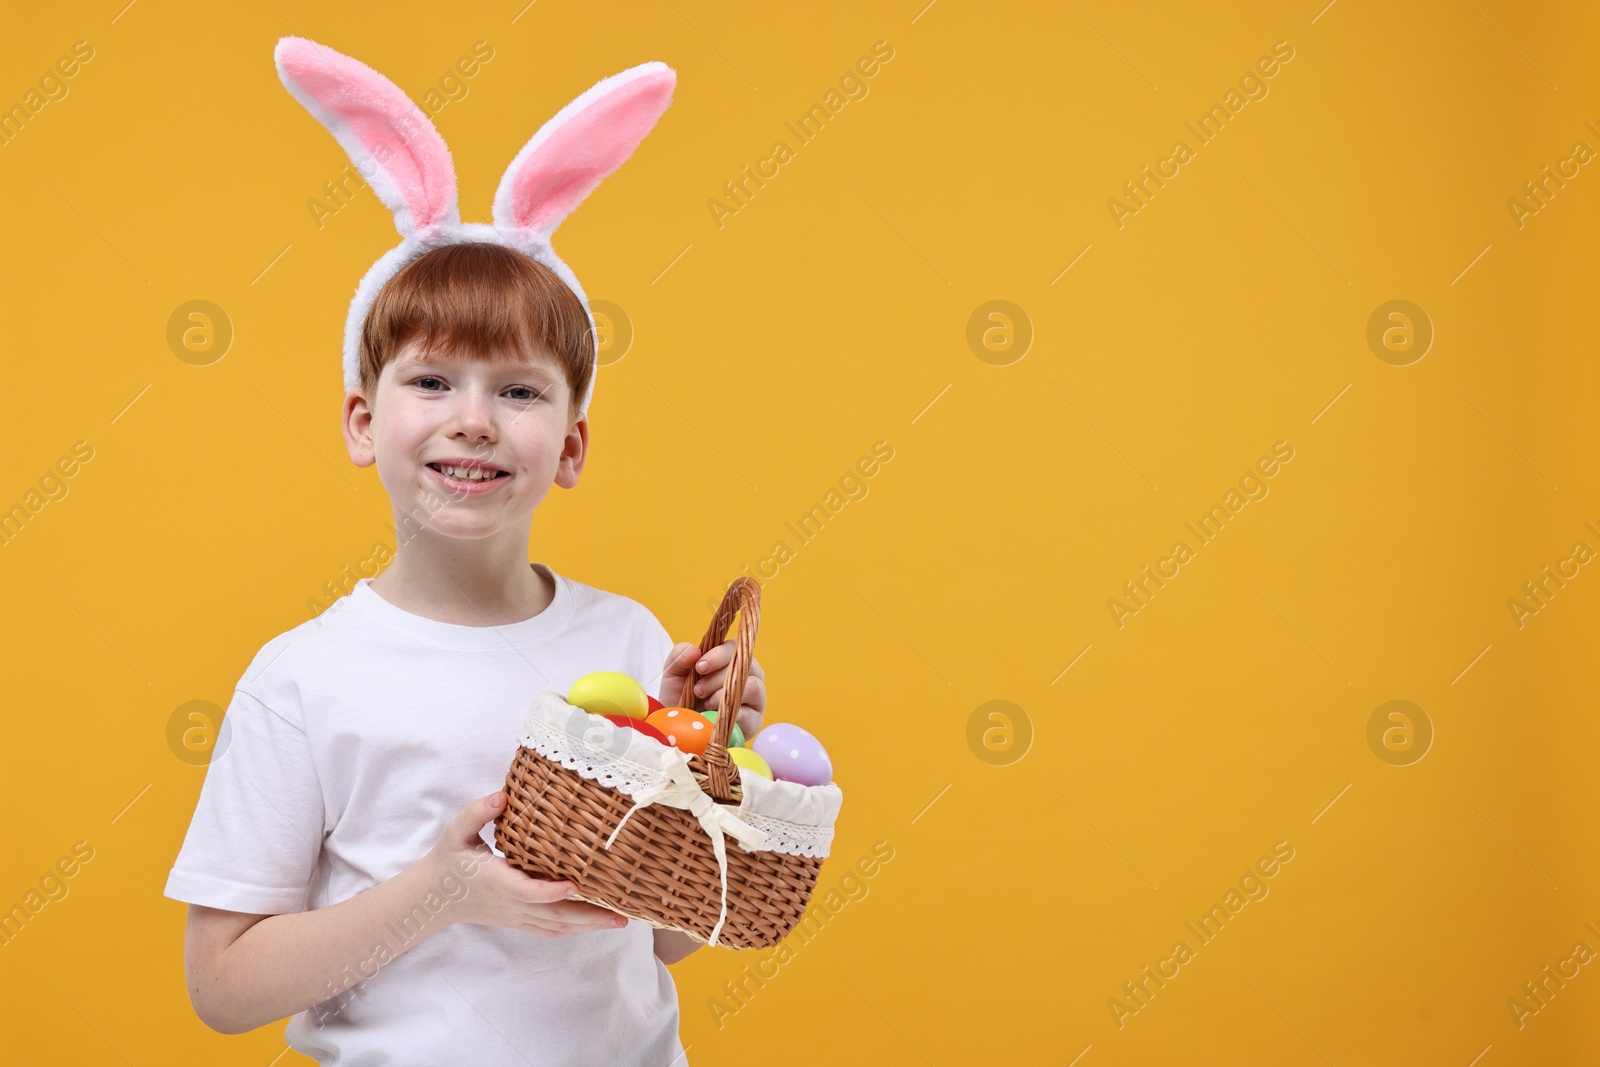 Photo of Easter celebration. Cute little boy with bunny ears and wicker basket full of painted eggs on orange background. Space for text